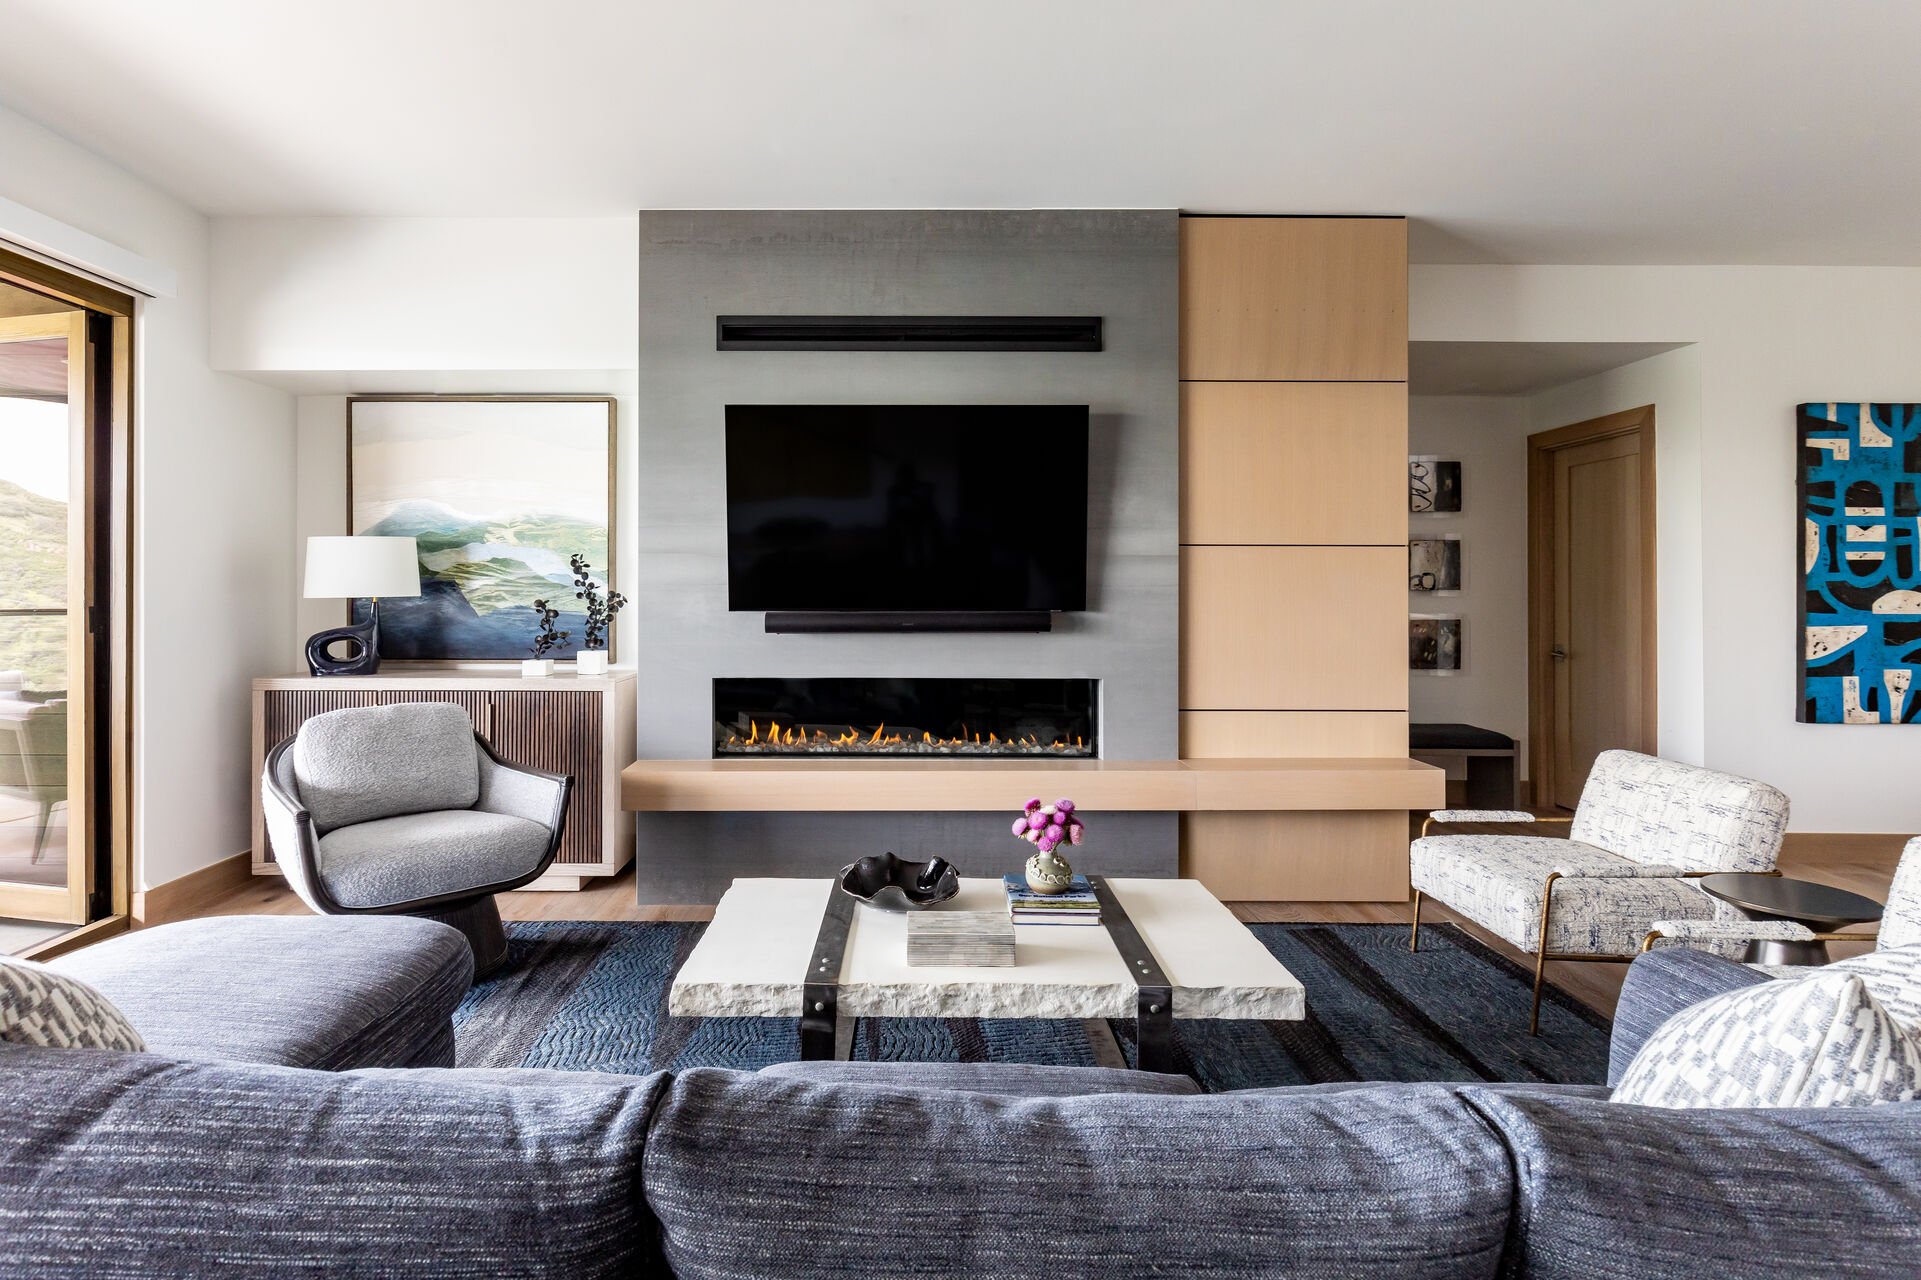 Cozy Space with a Smart TV with Sonos sound bar